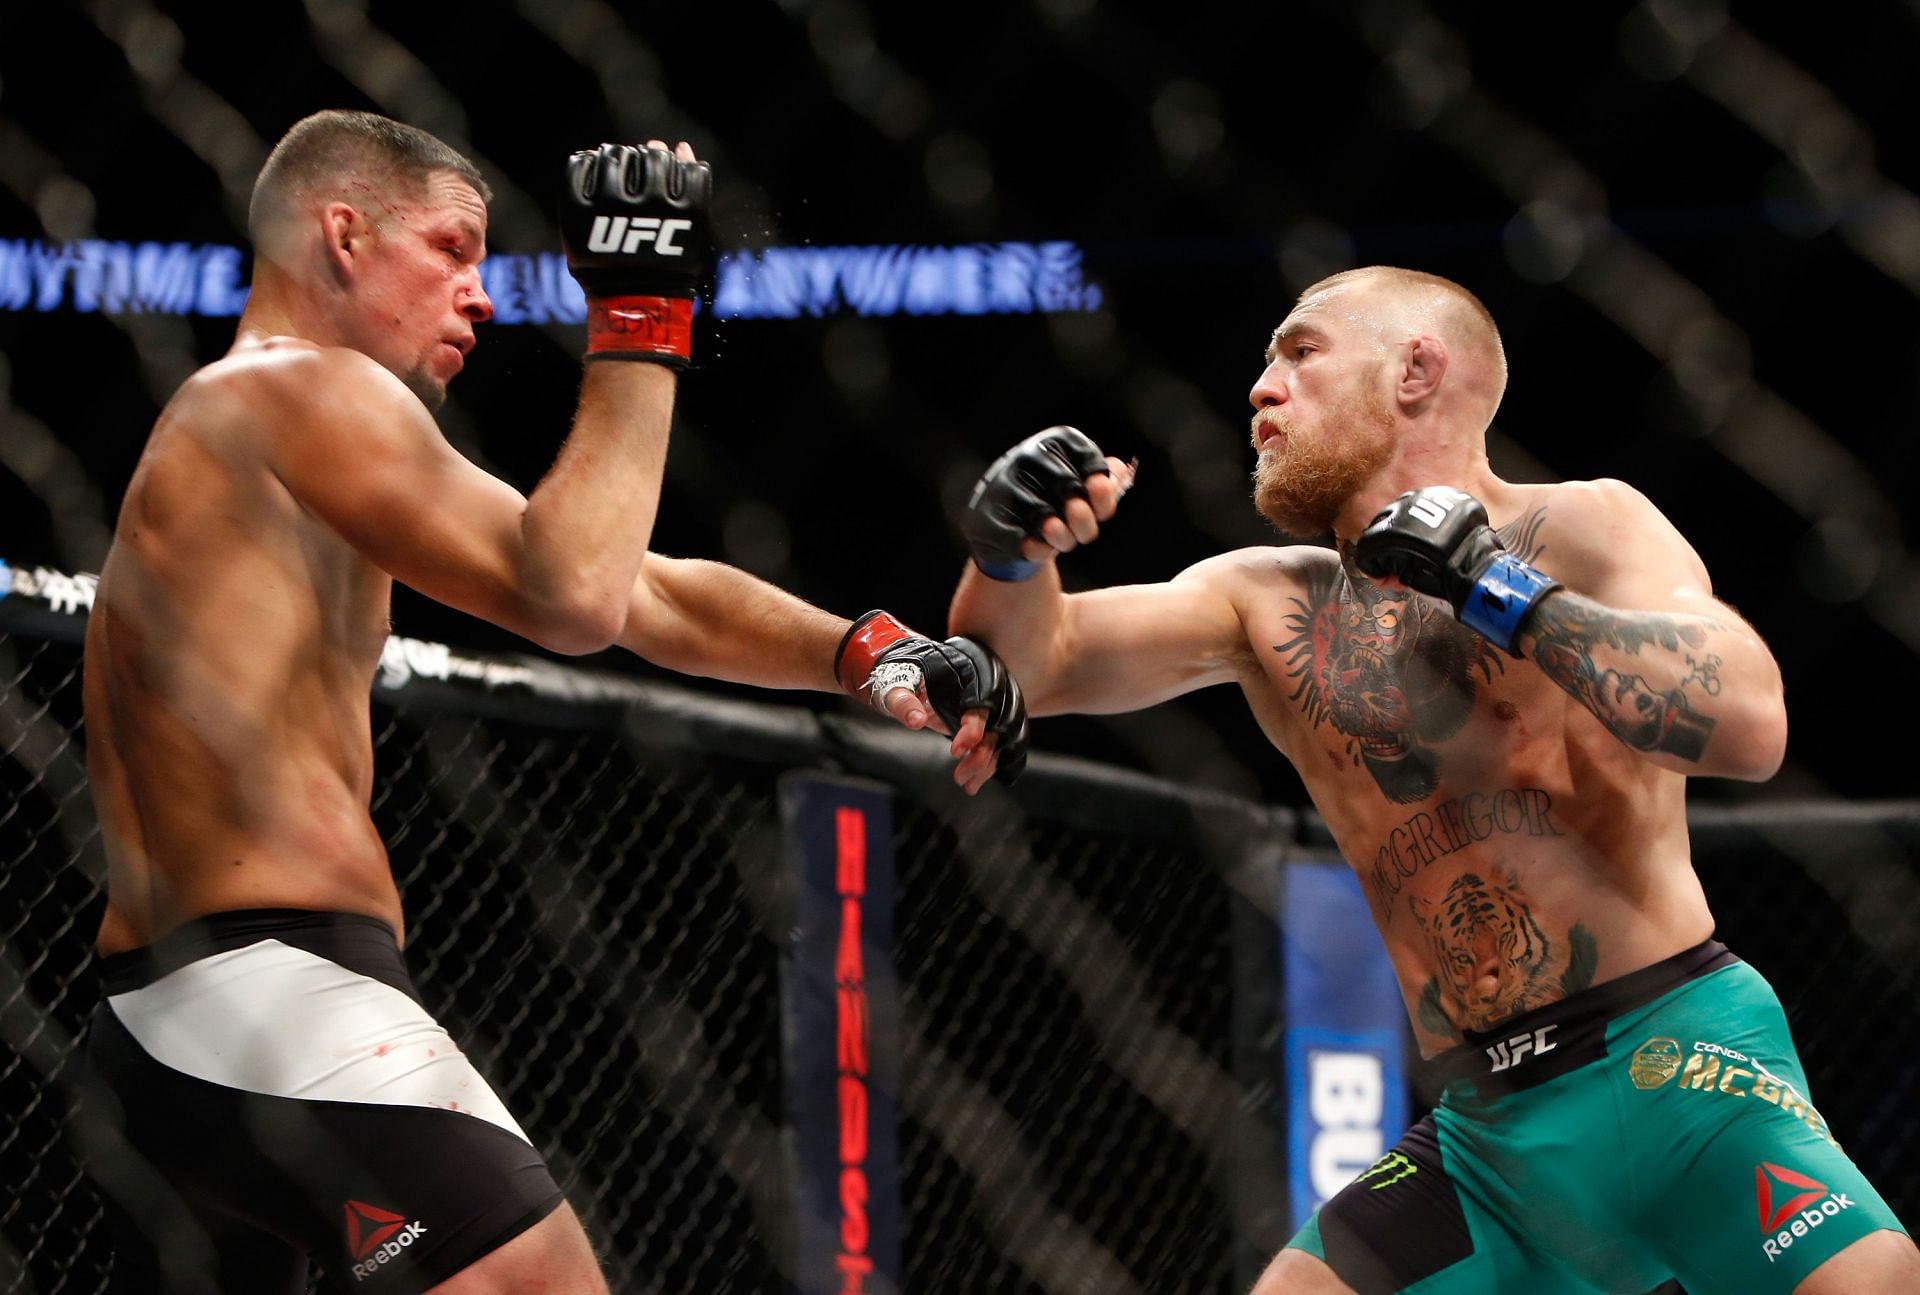 Nate Diaz (left) and Conor McGregor (right) fought twice in 2016